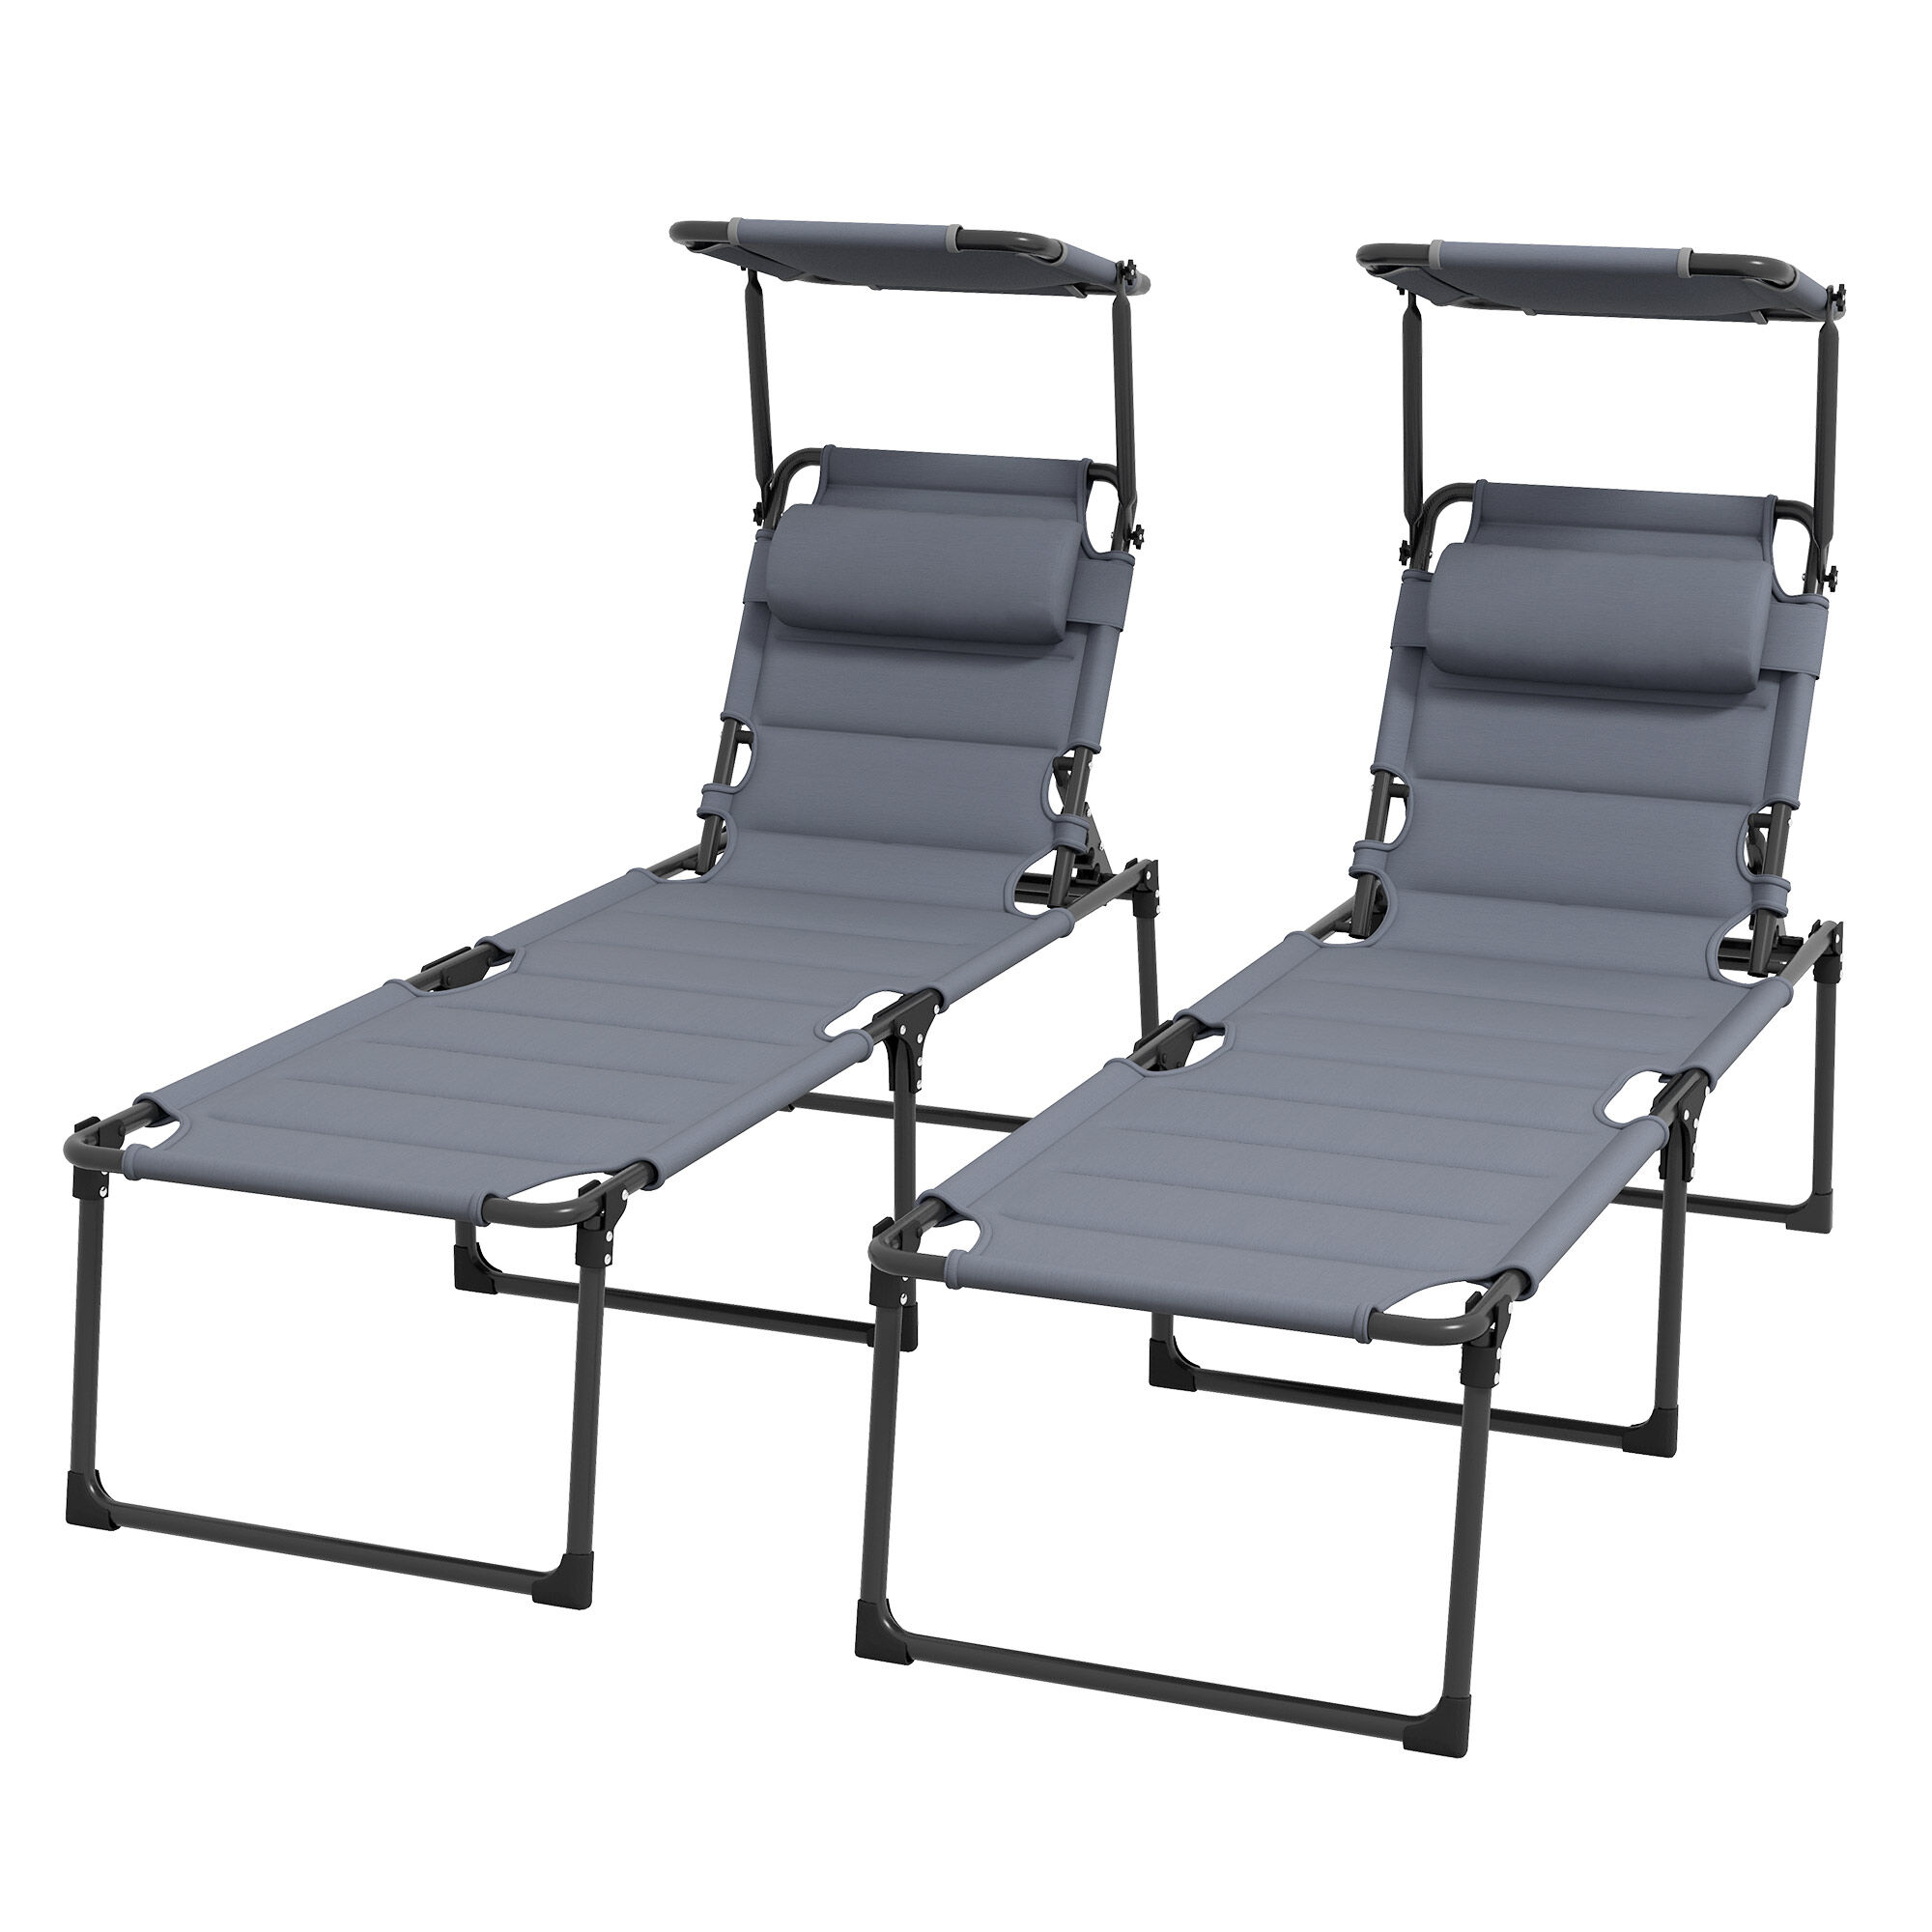 Outsunny 2 Folding Chaise Lounge Pool Chairs, Outdoor Sun Tanning Chairs w/ Sunroof, Headrests, 4-Position Reclining Back, Gray